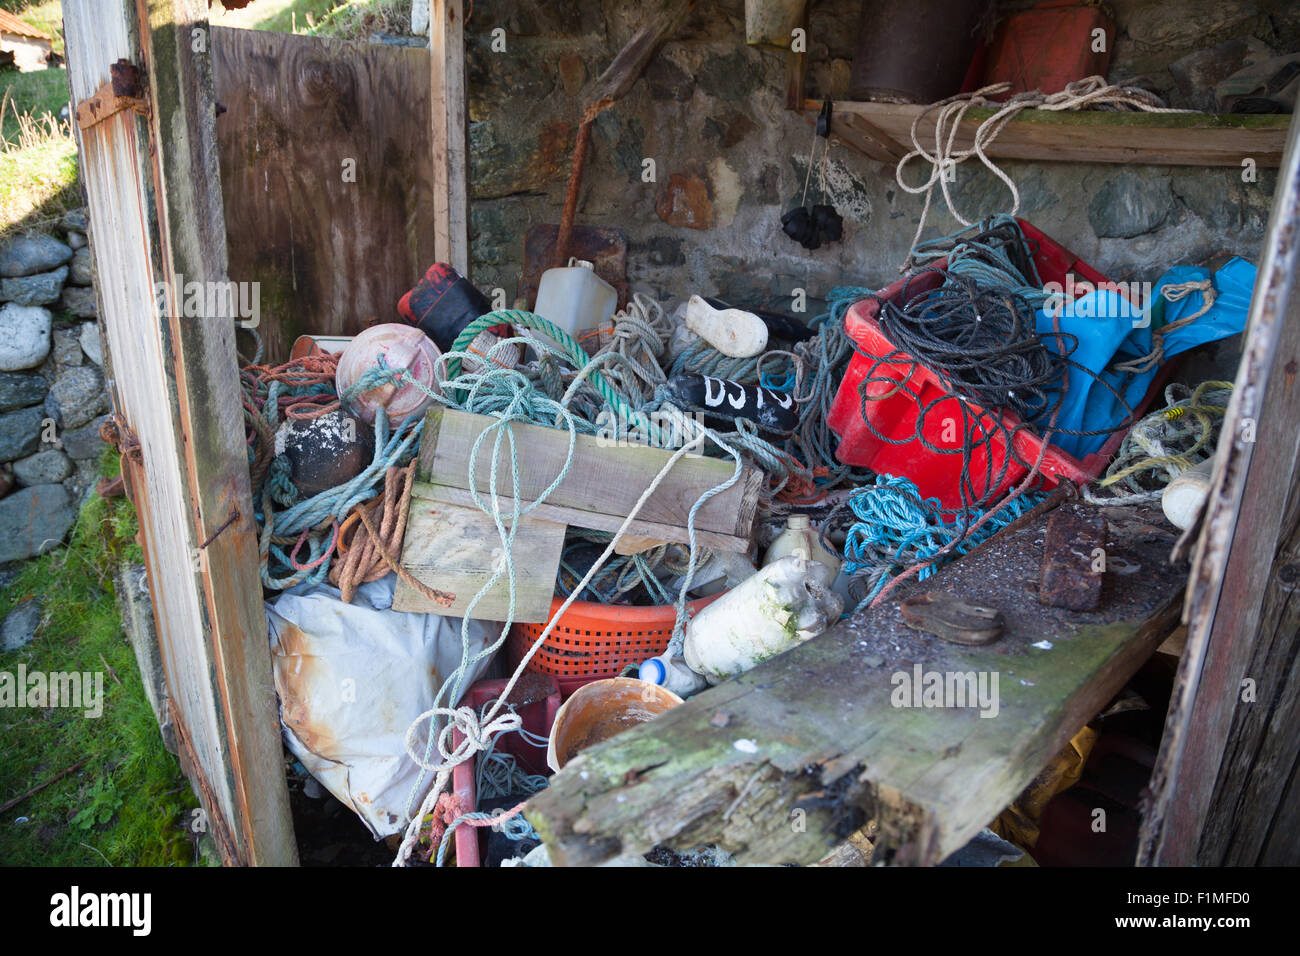 Contents of an abandoned fishing hut at Porth Ysgaden, Tudweiliog, Llyn Peninsula, North Wales with rope, boxes, buoys & crates Stock Photo